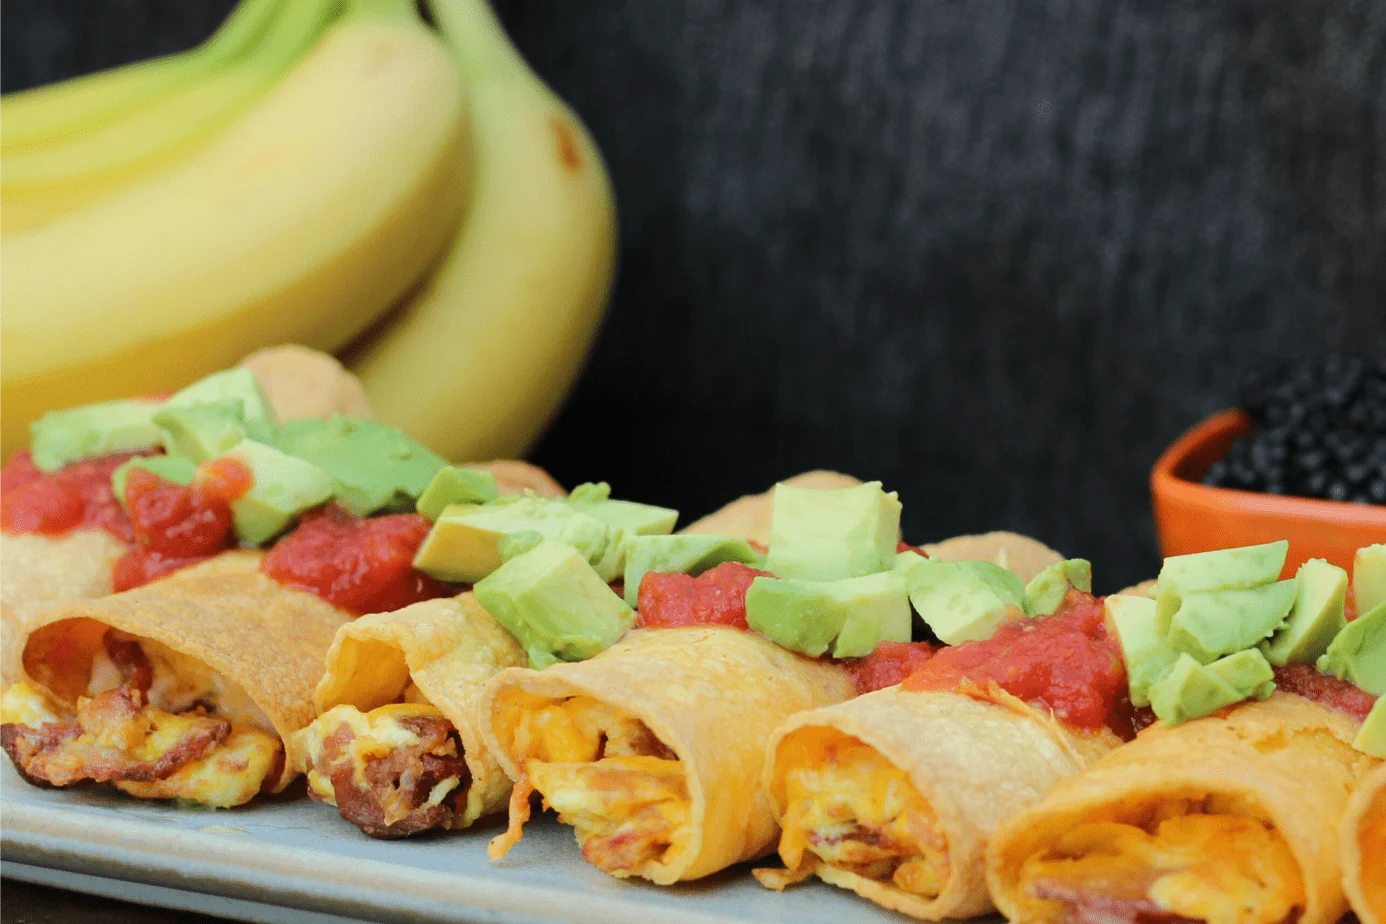 Taquitos lined up on a plate.